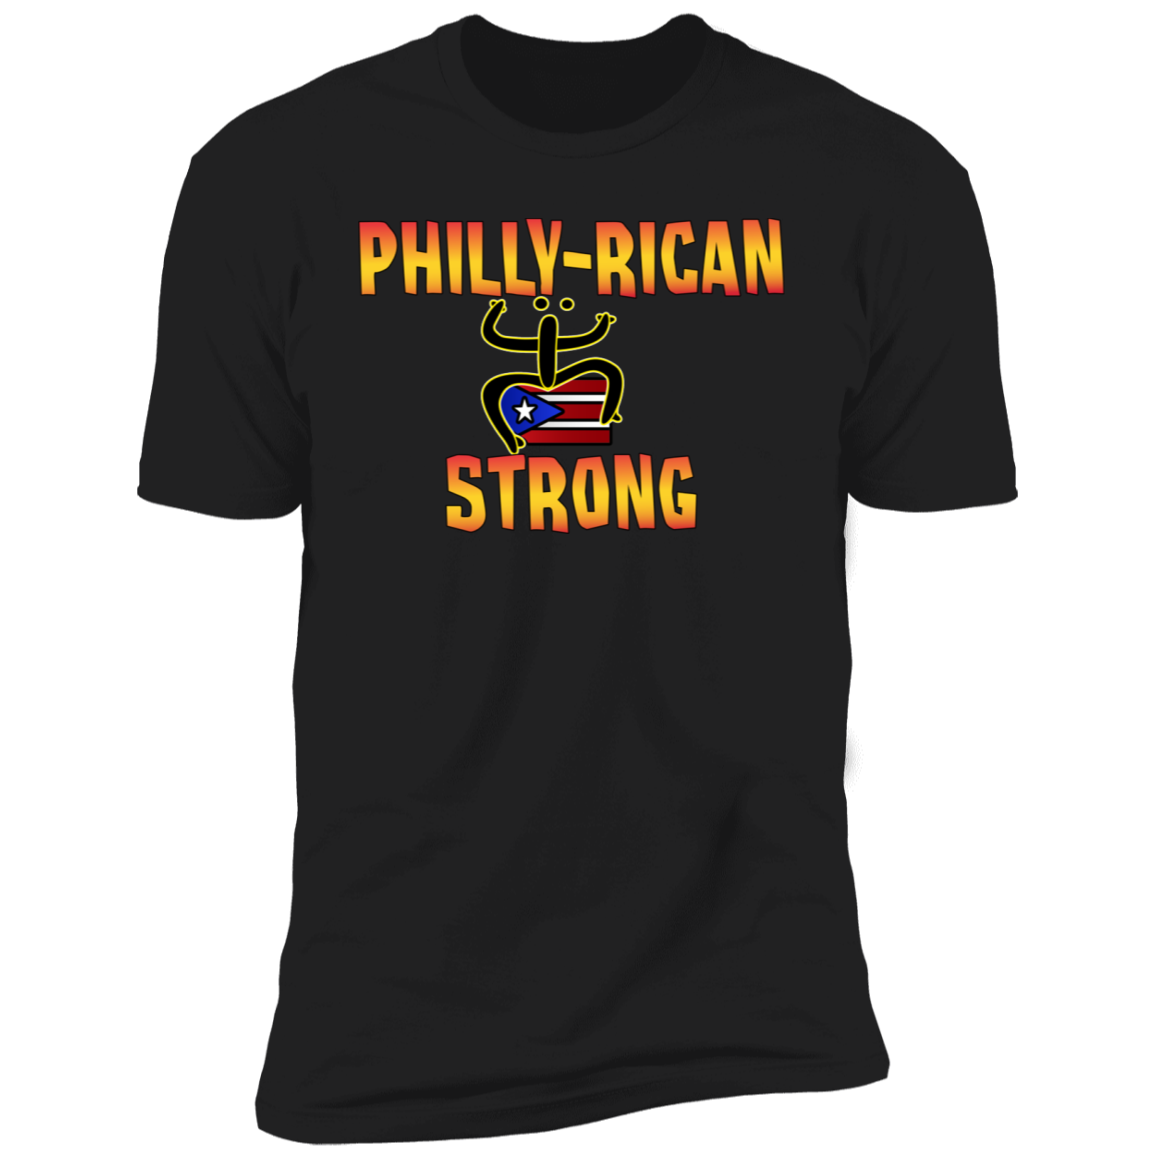 Philly-Rican Strong Premium Short Sleeve T-Shirt - Puerto Rican Pride